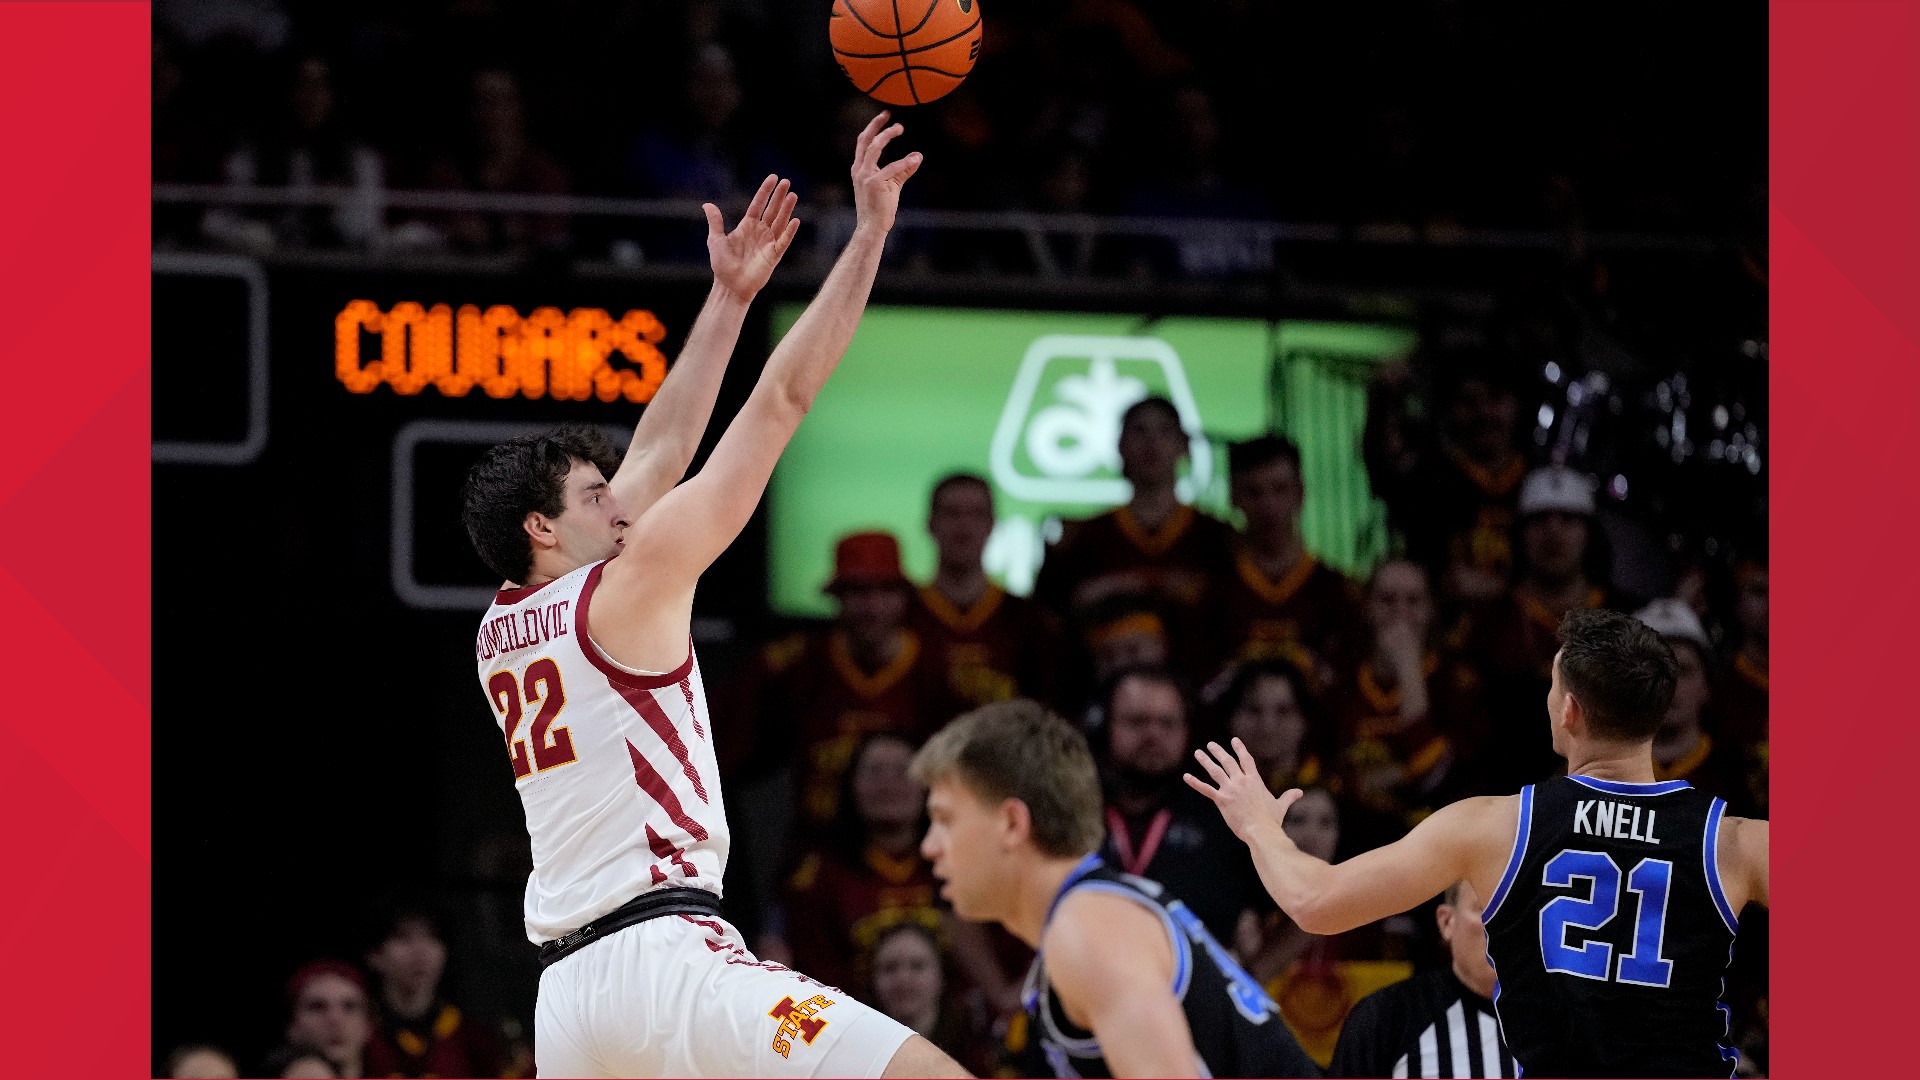 The Cyclones came back for a gritty win on senior night against BYU, finishing their regular season undefeated at home.